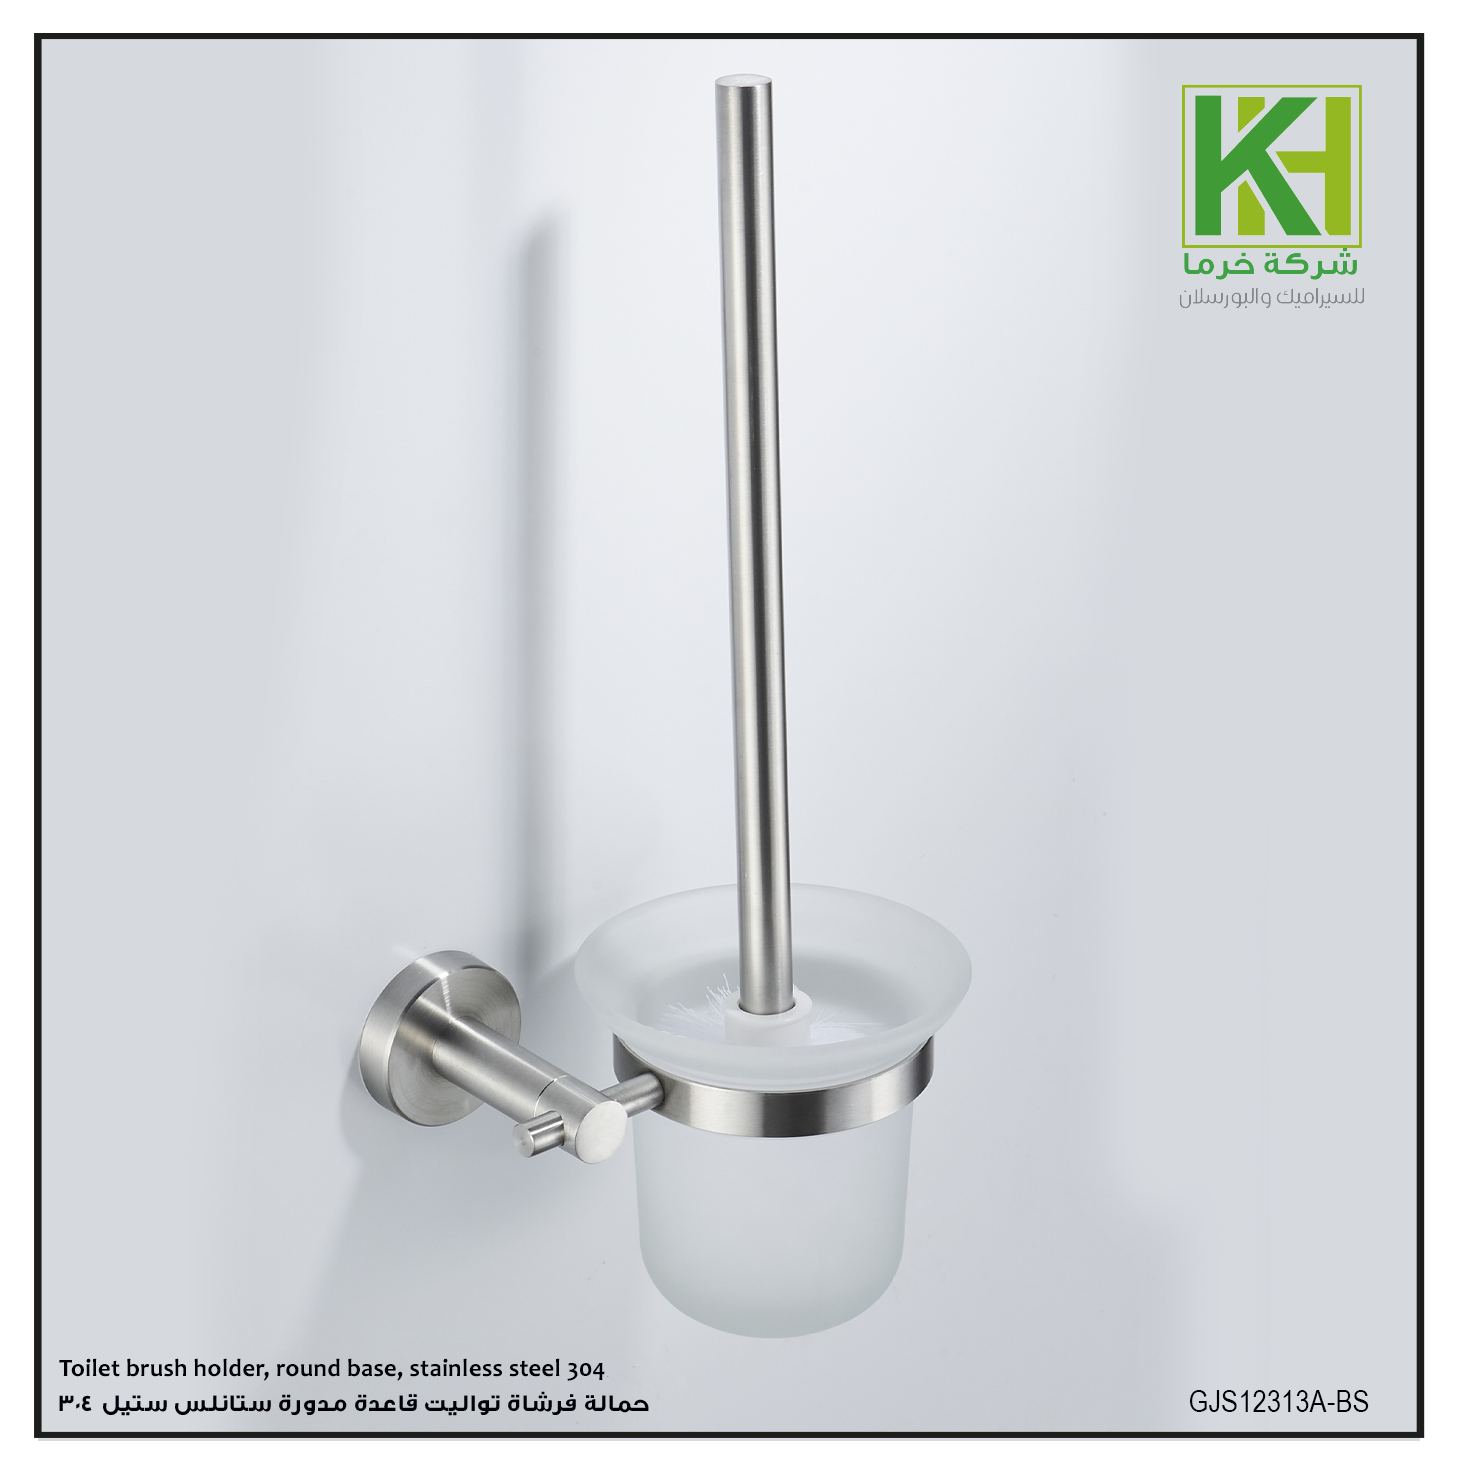 Picture of Toilet brush holder, round base, stainless steel 304